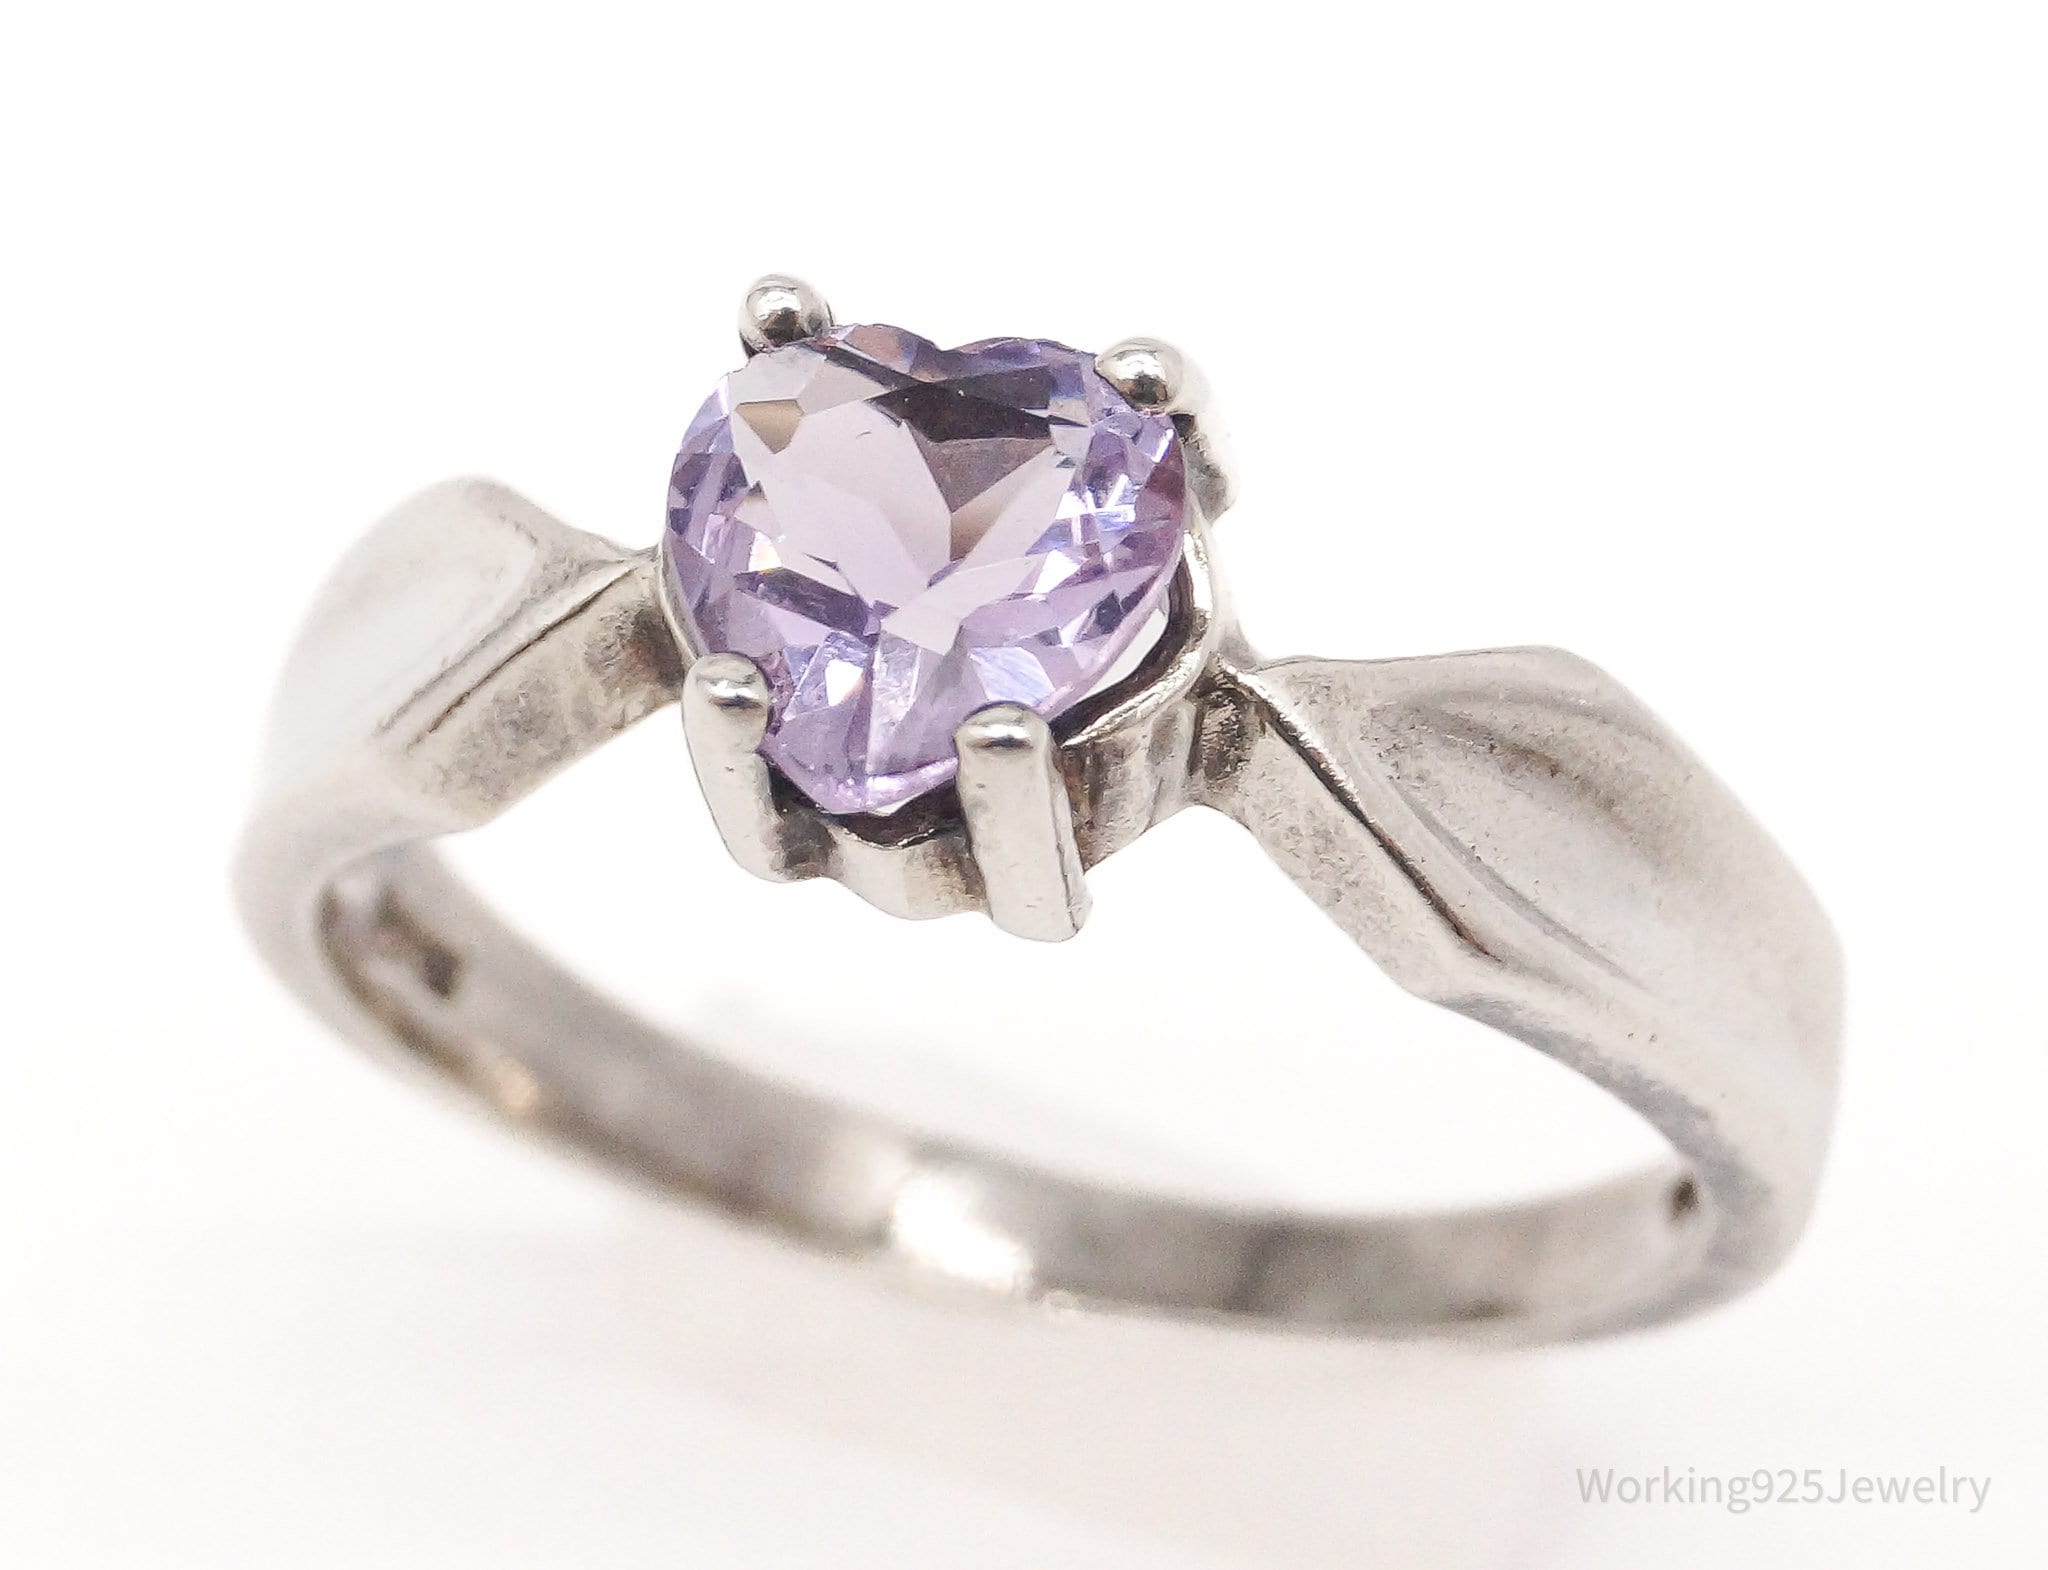 Vintage Amethyst Heart Sterling Silver Ring - Size 7